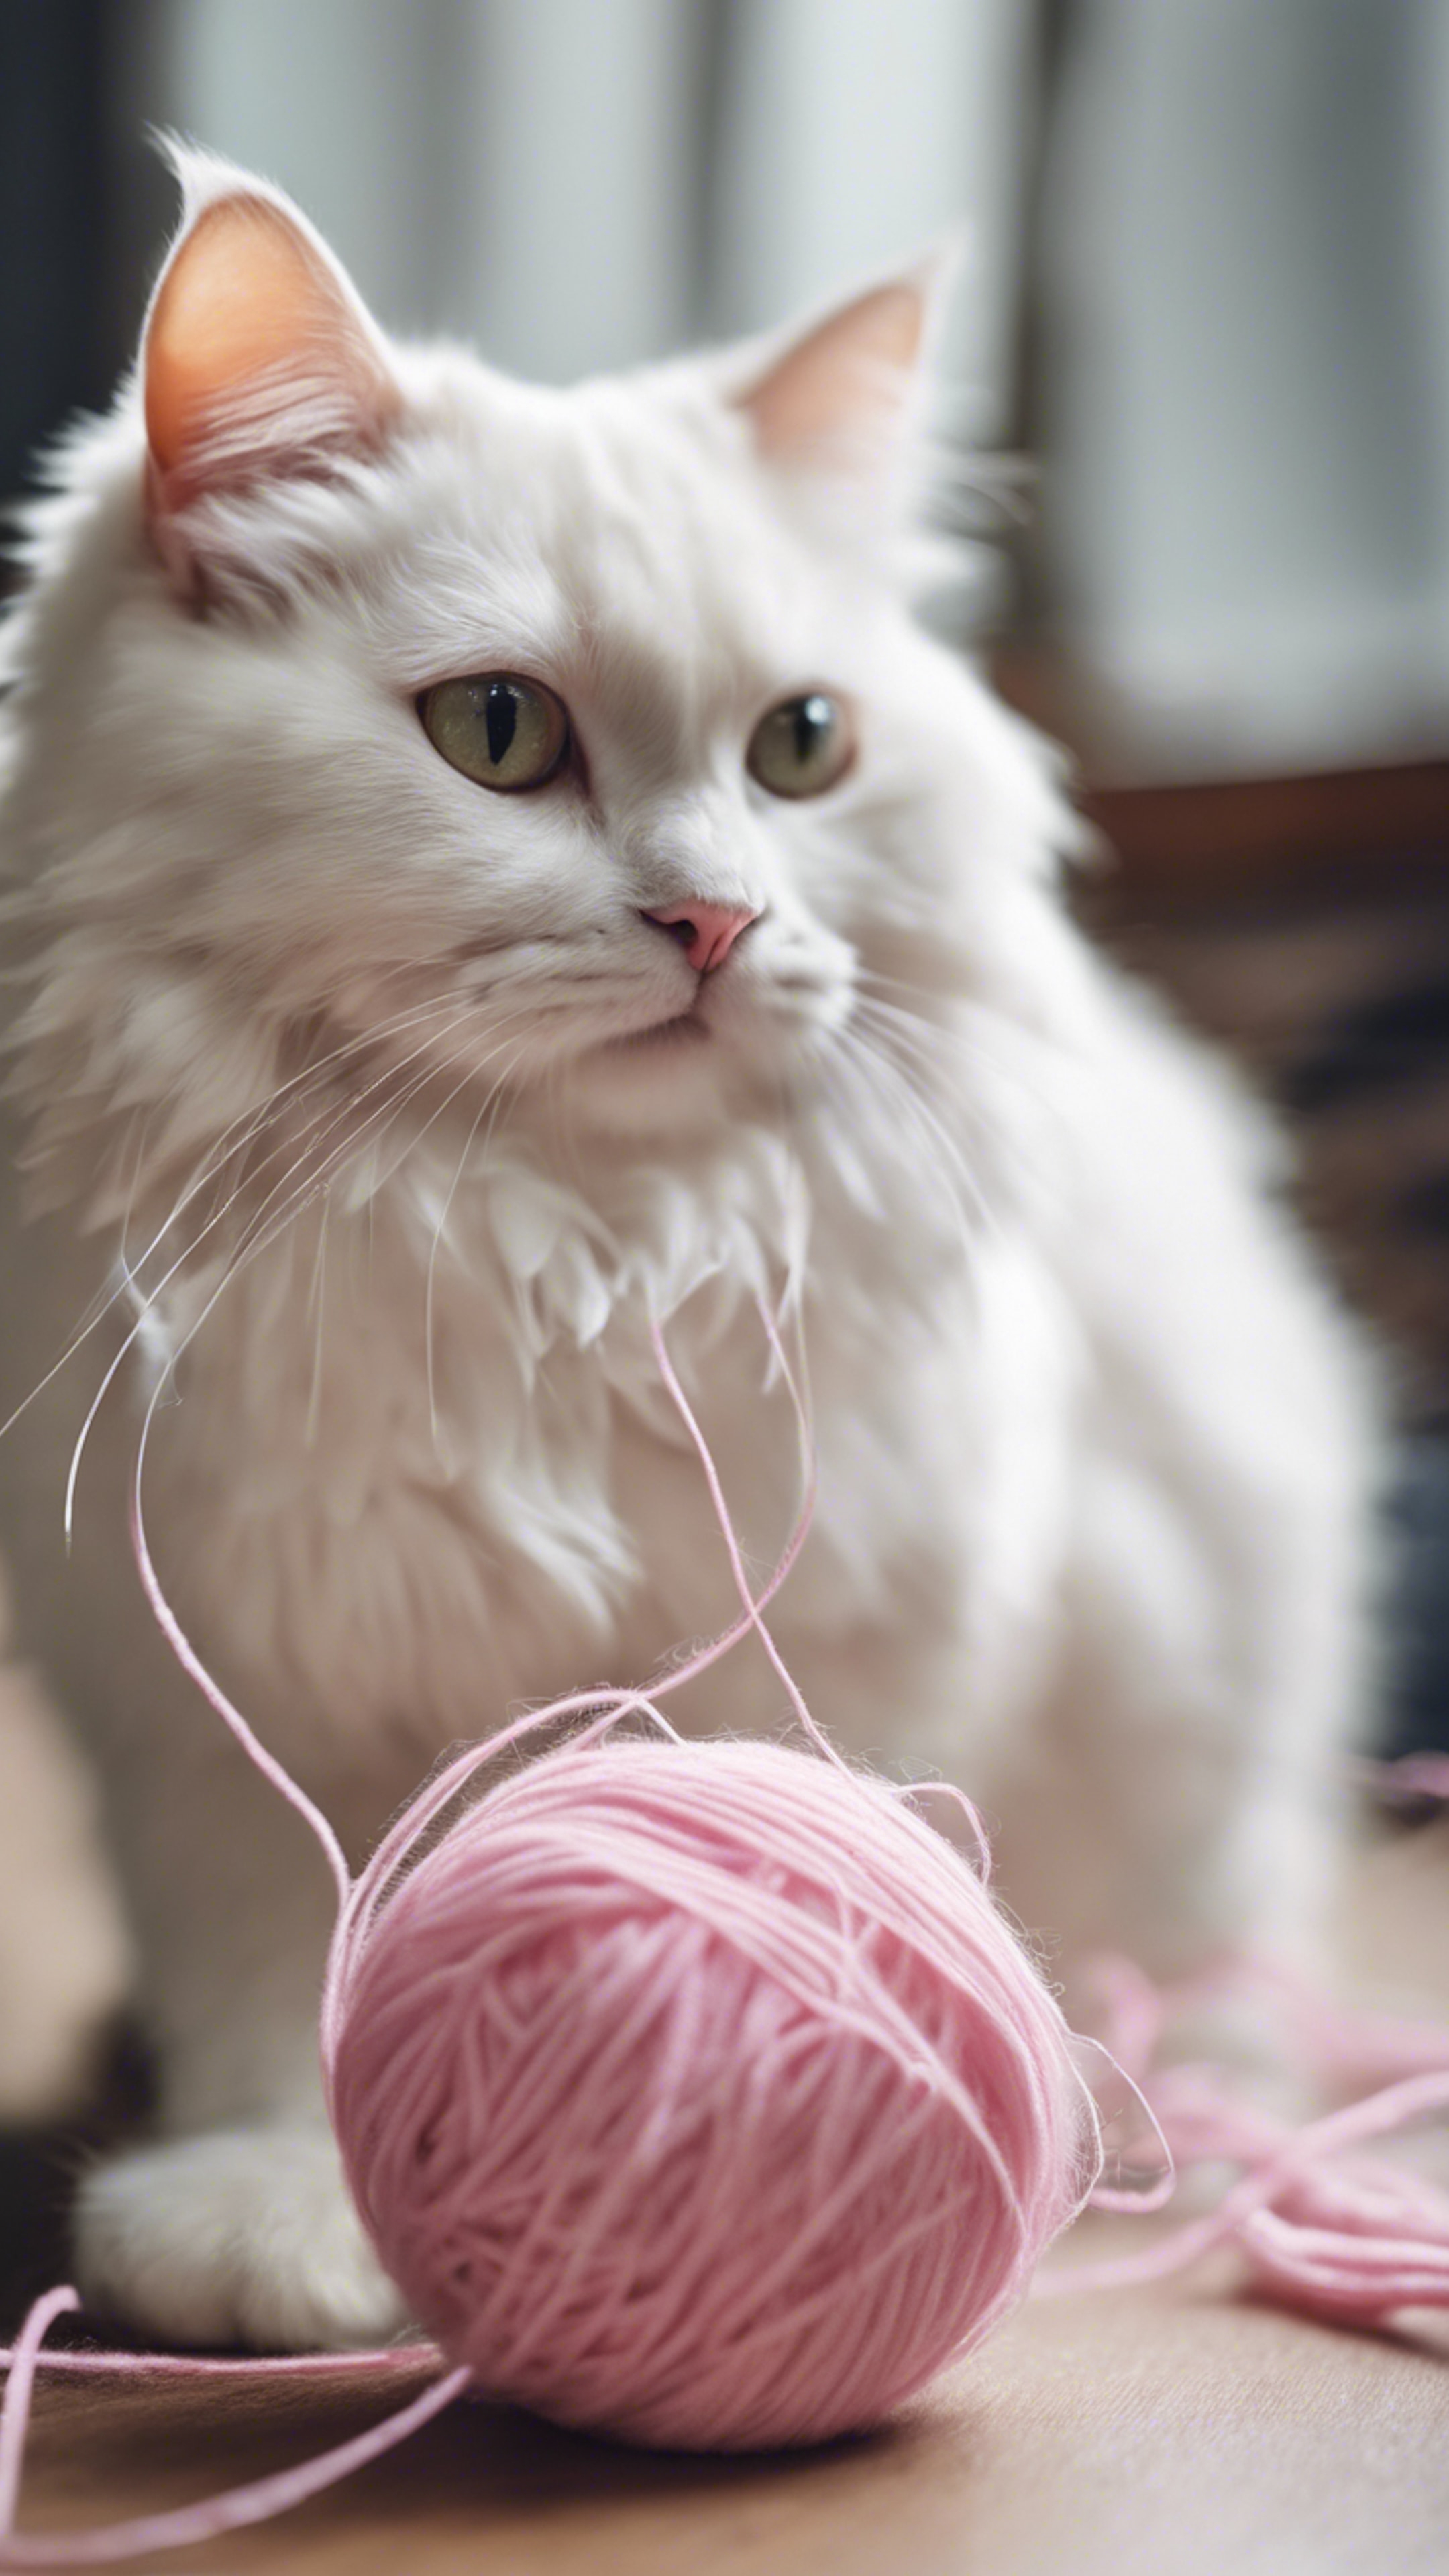 An adorable white cat, fluff all around, playing with a pink ball of yarn. ផ្ទាំង​រូបភាព[2f9056787526421e963d]